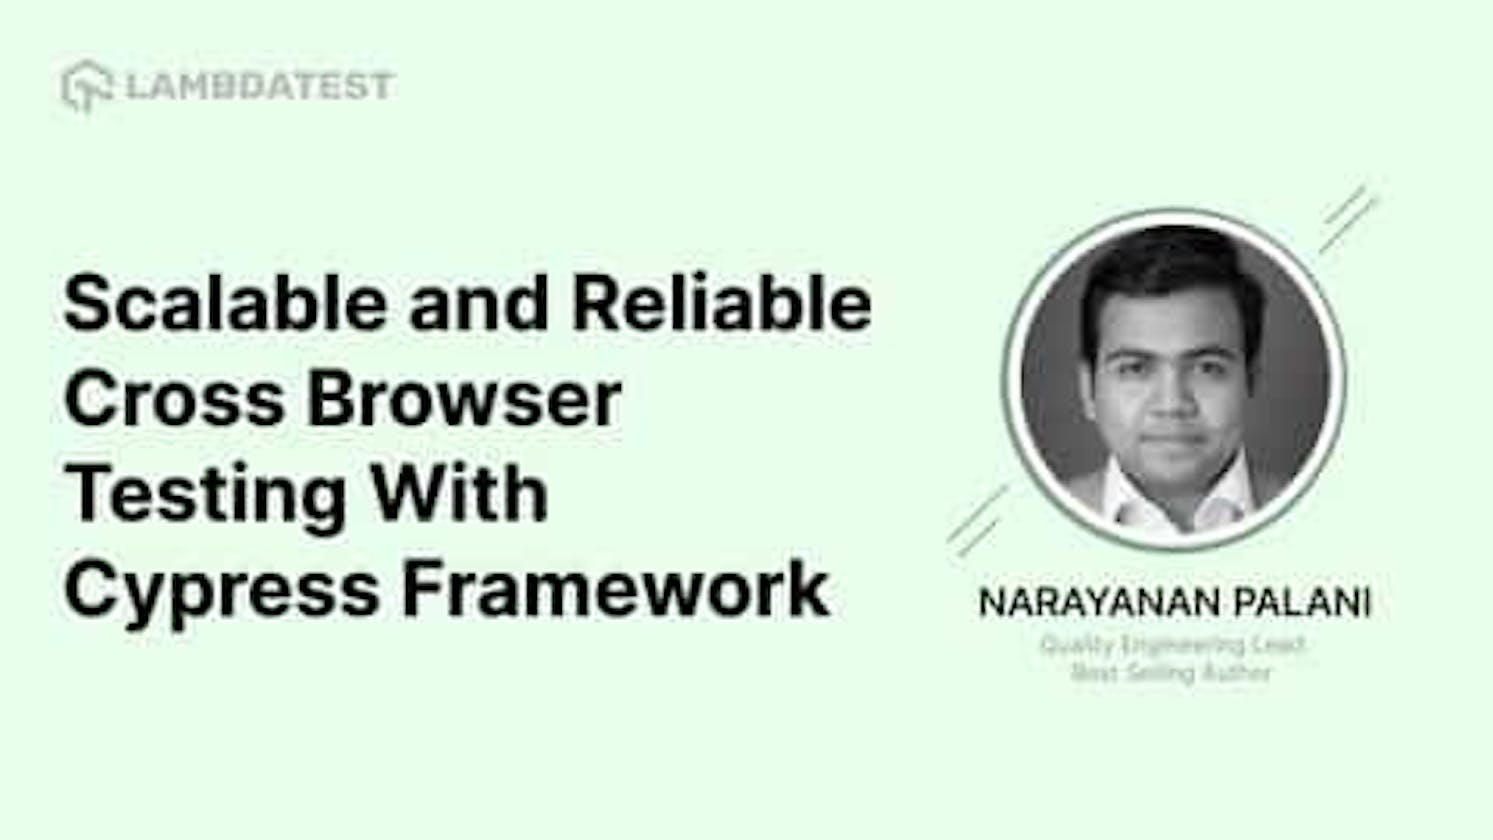 Scalable and Reliable Cross Browser Testing With Cypress Framework